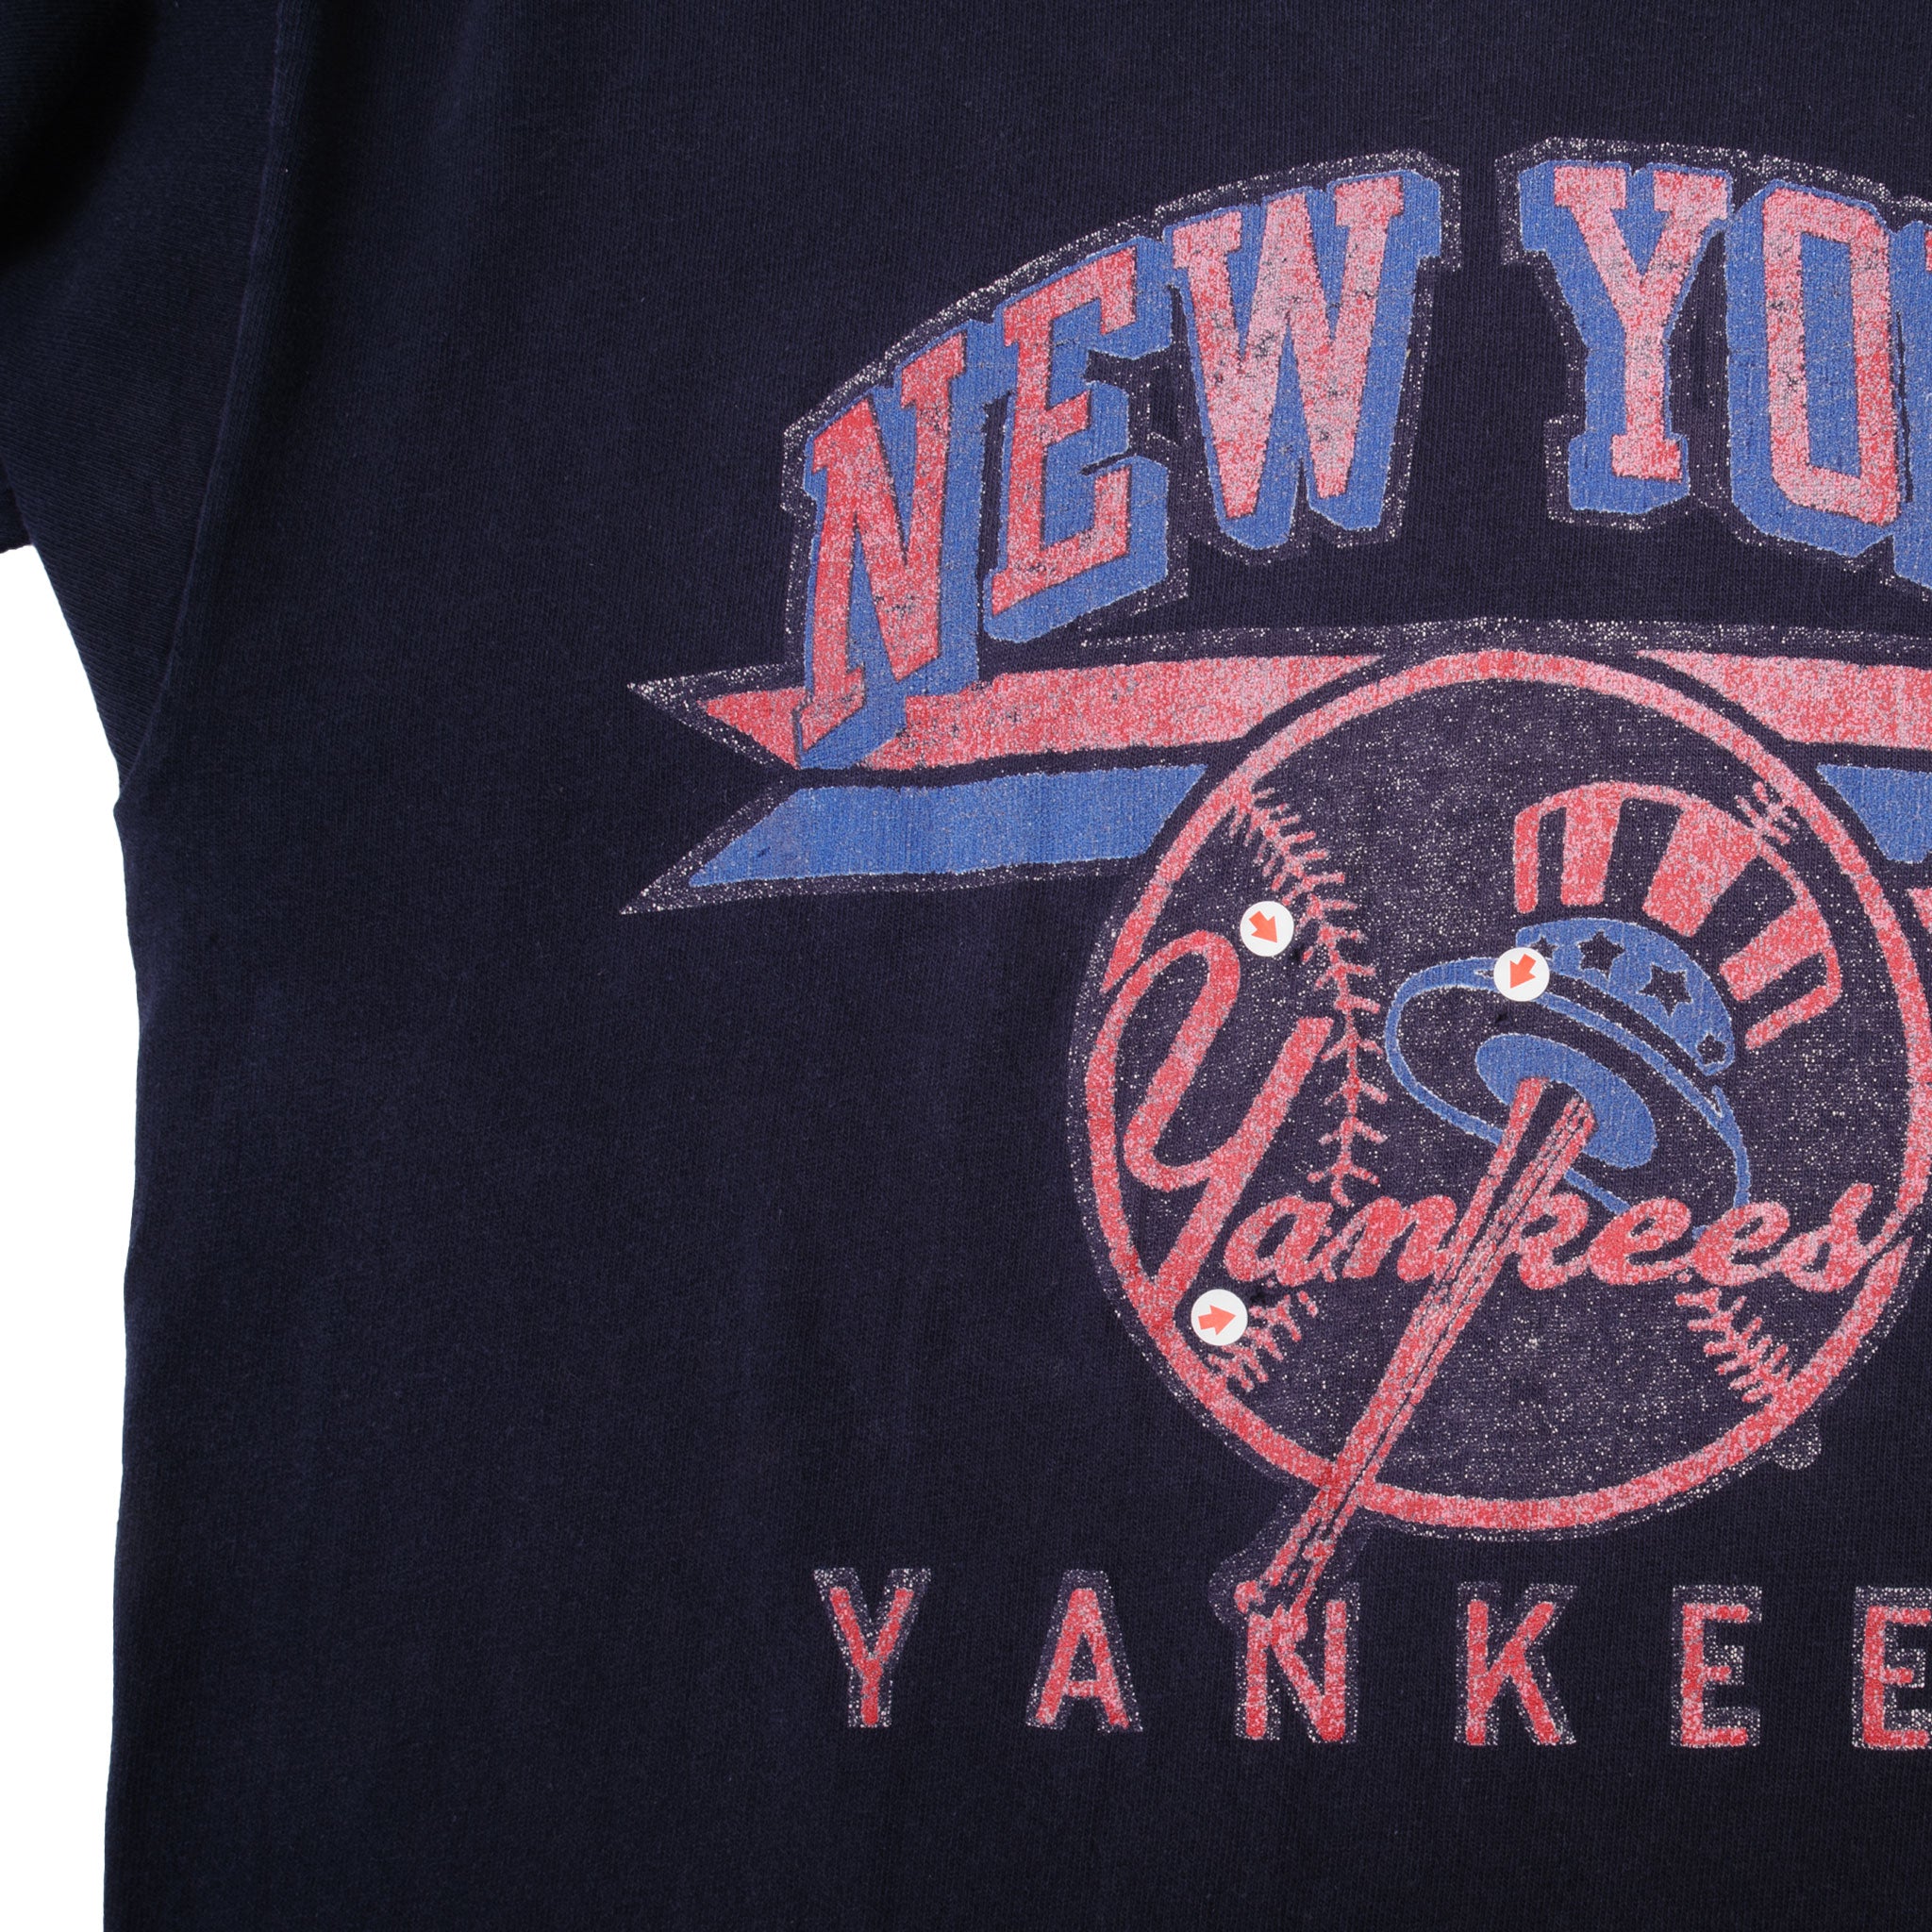 Sports / College Vintage Champion MLB New York Yankees Tee Shirt 1980s Size Large Made in USA